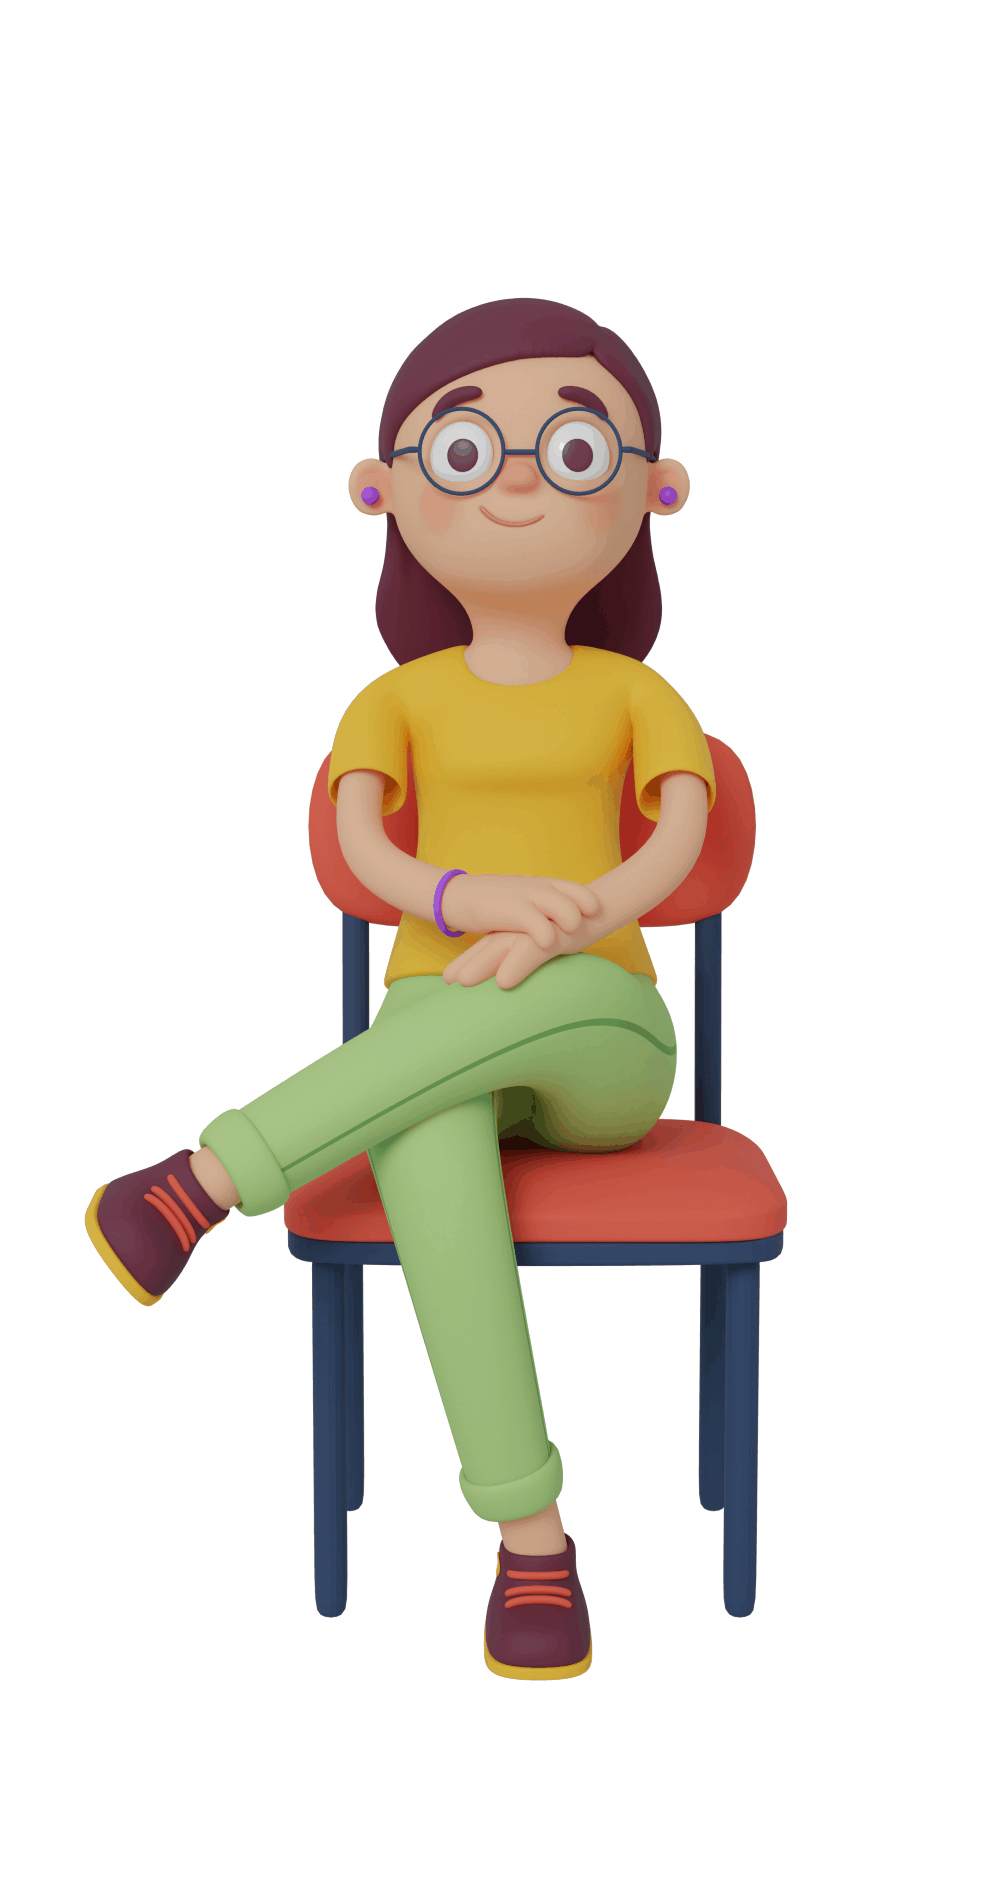 3d character design of a girl sitting down on a chair